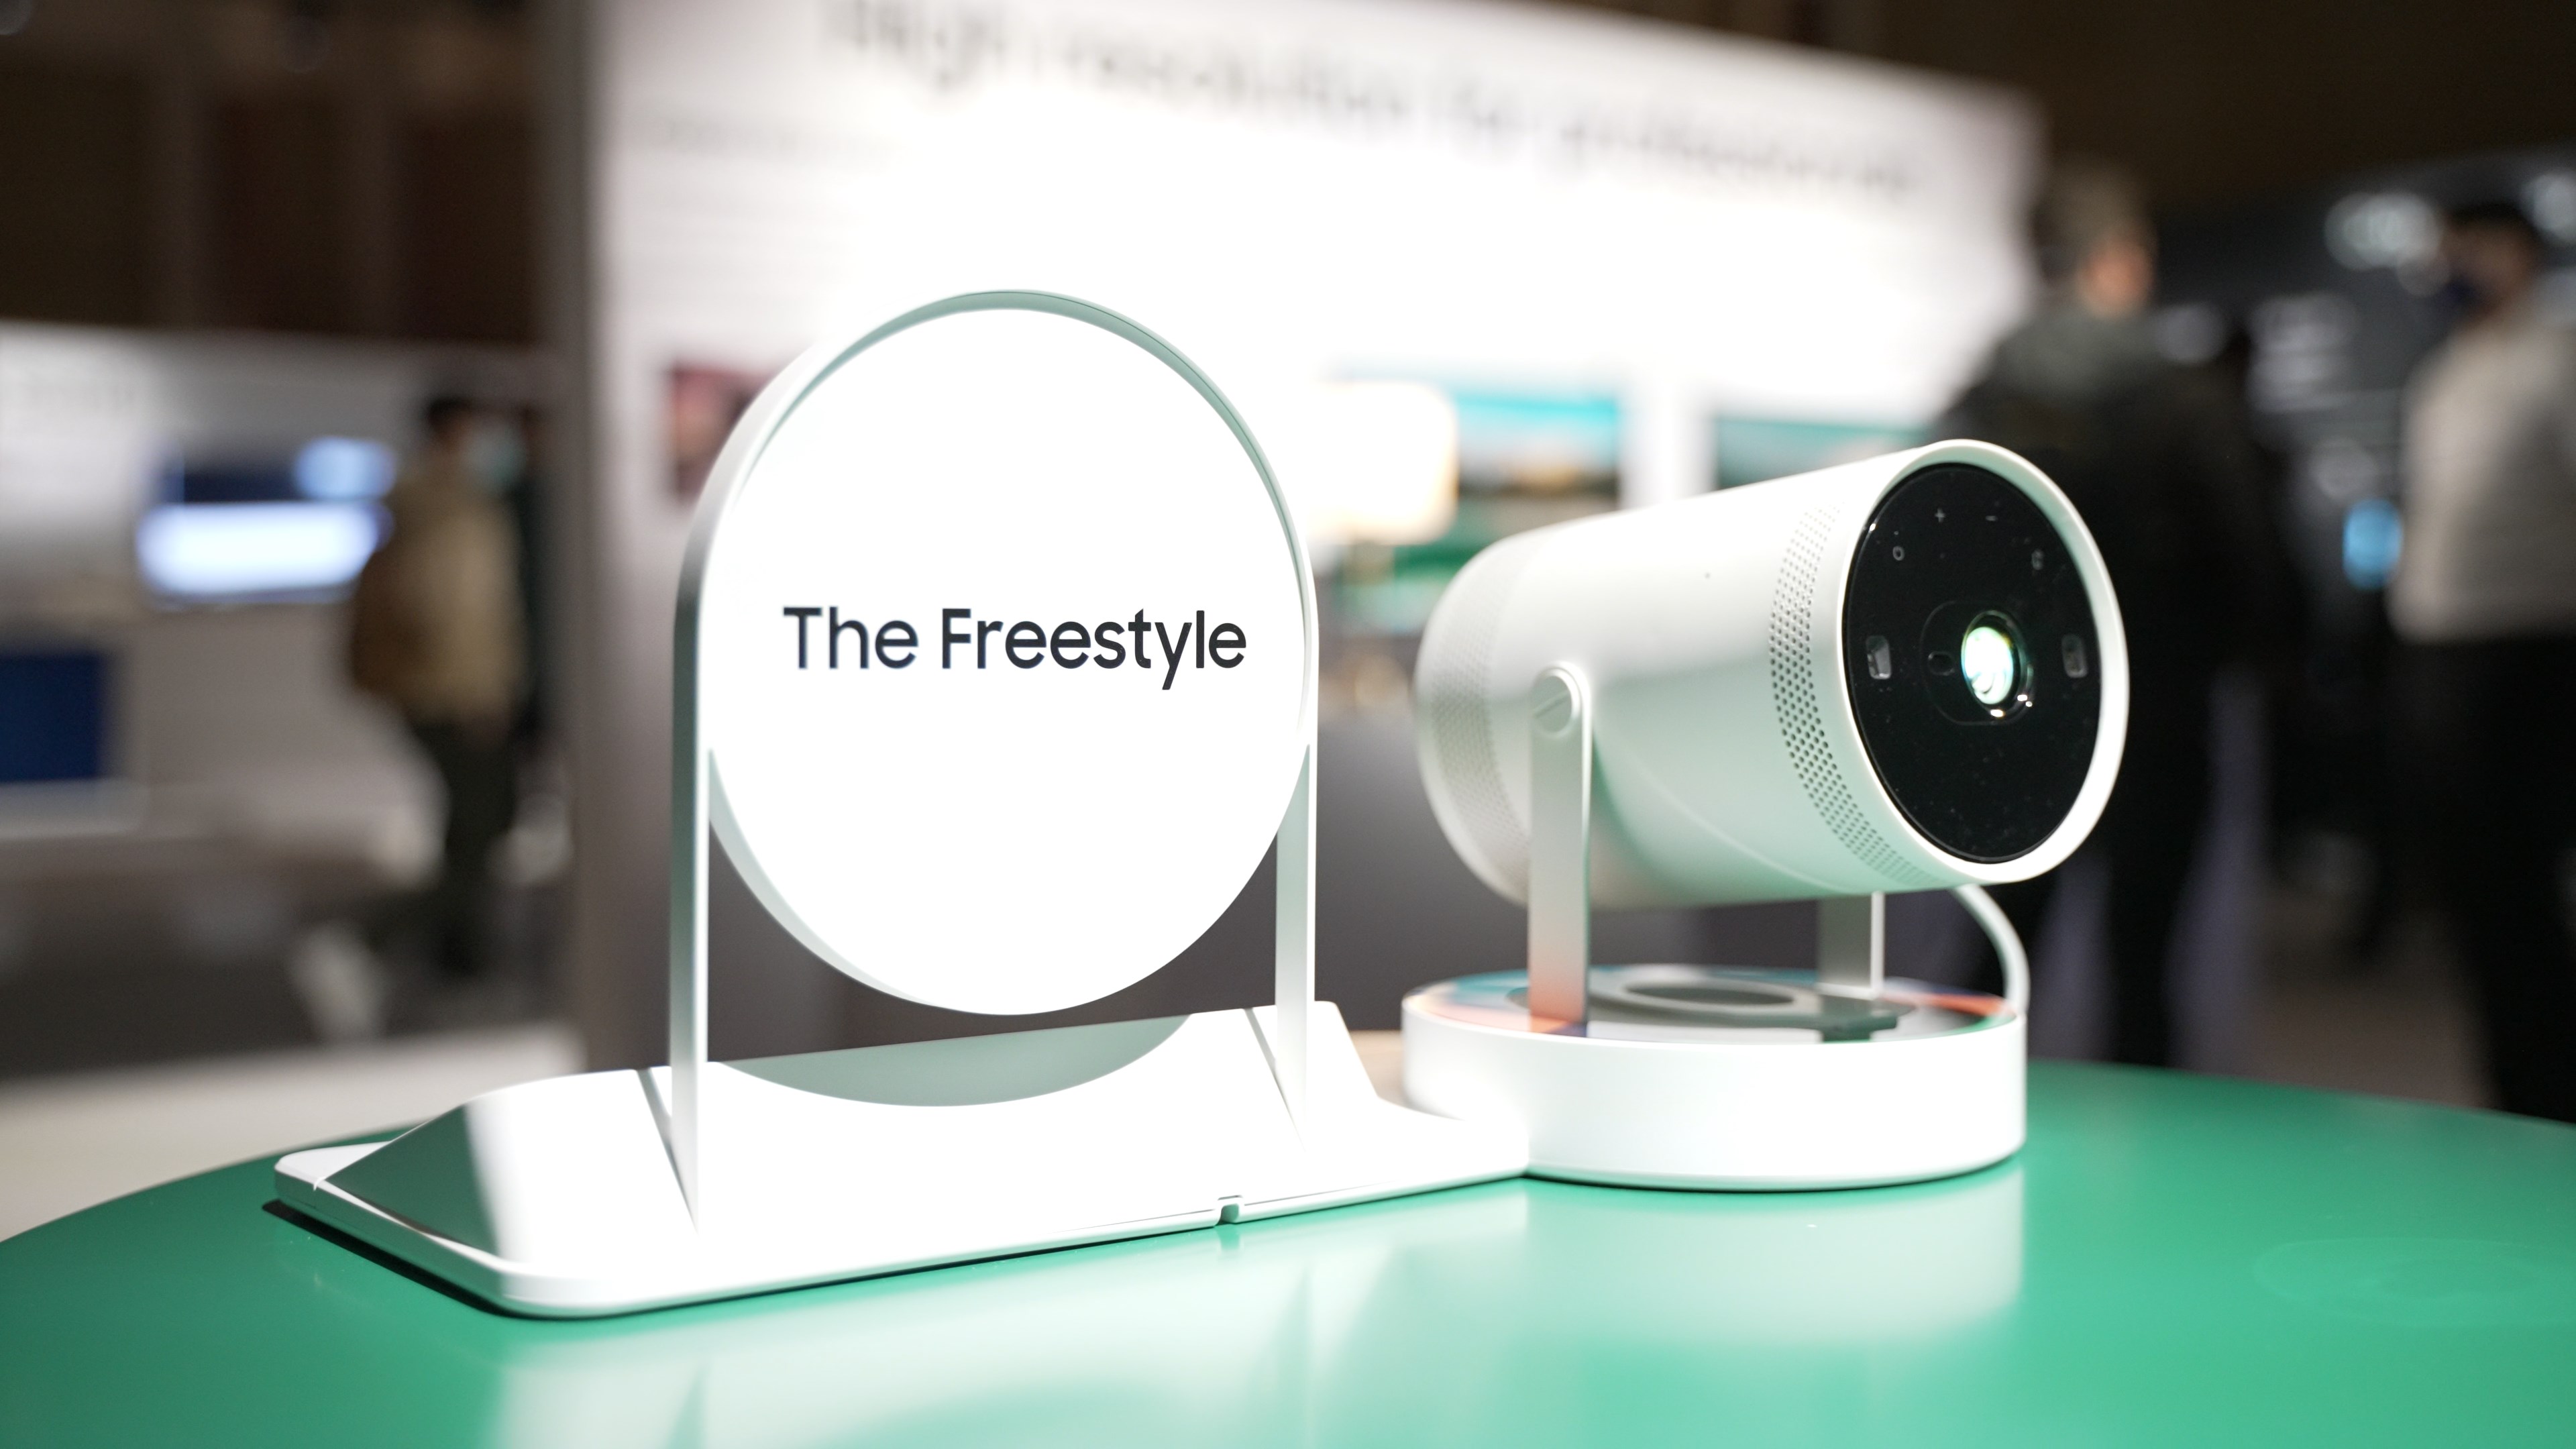 Proyector Smart Freestyle Samsung A/1